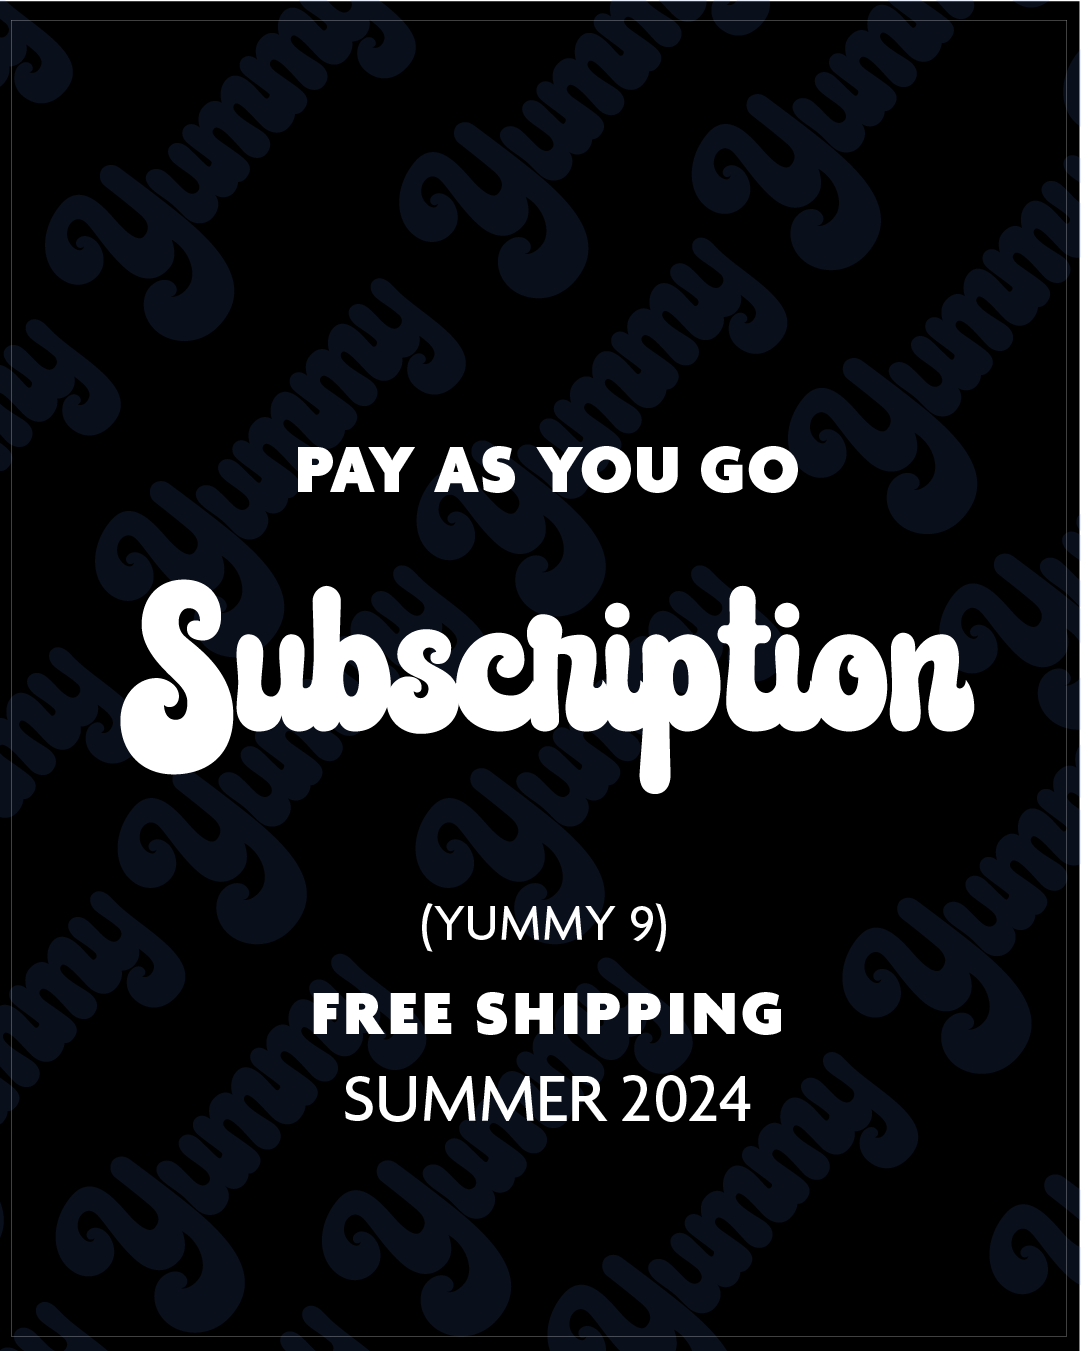 Subscribe to Yummy - start at NINE (FREE SHIPPING) (8026881786106)